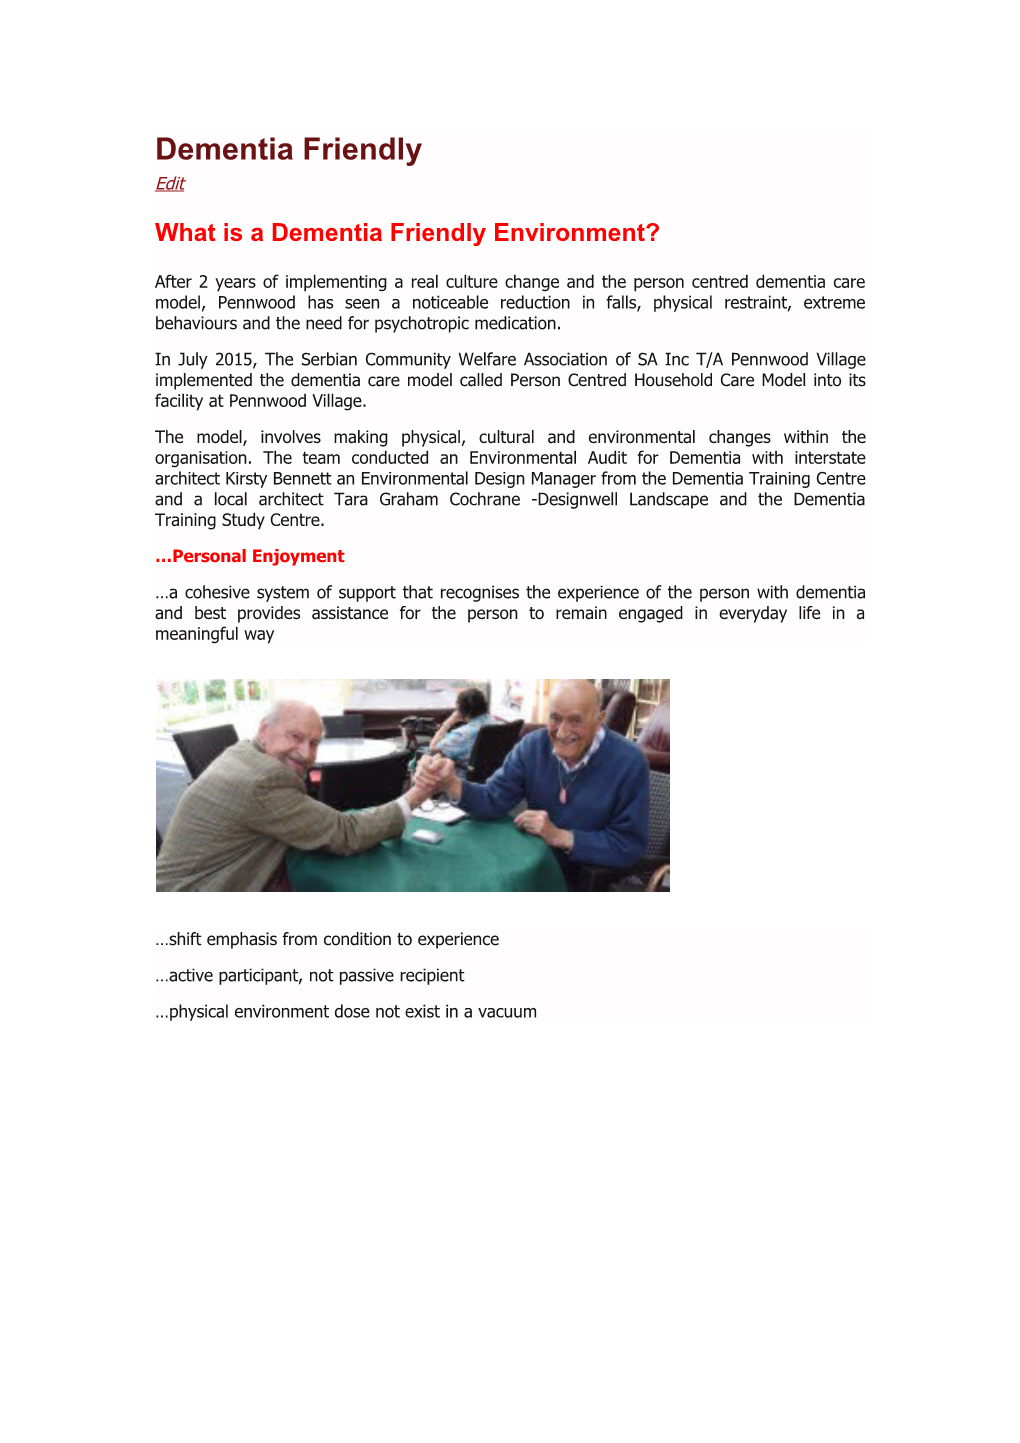 What Is a Dementia Friendly Environment?